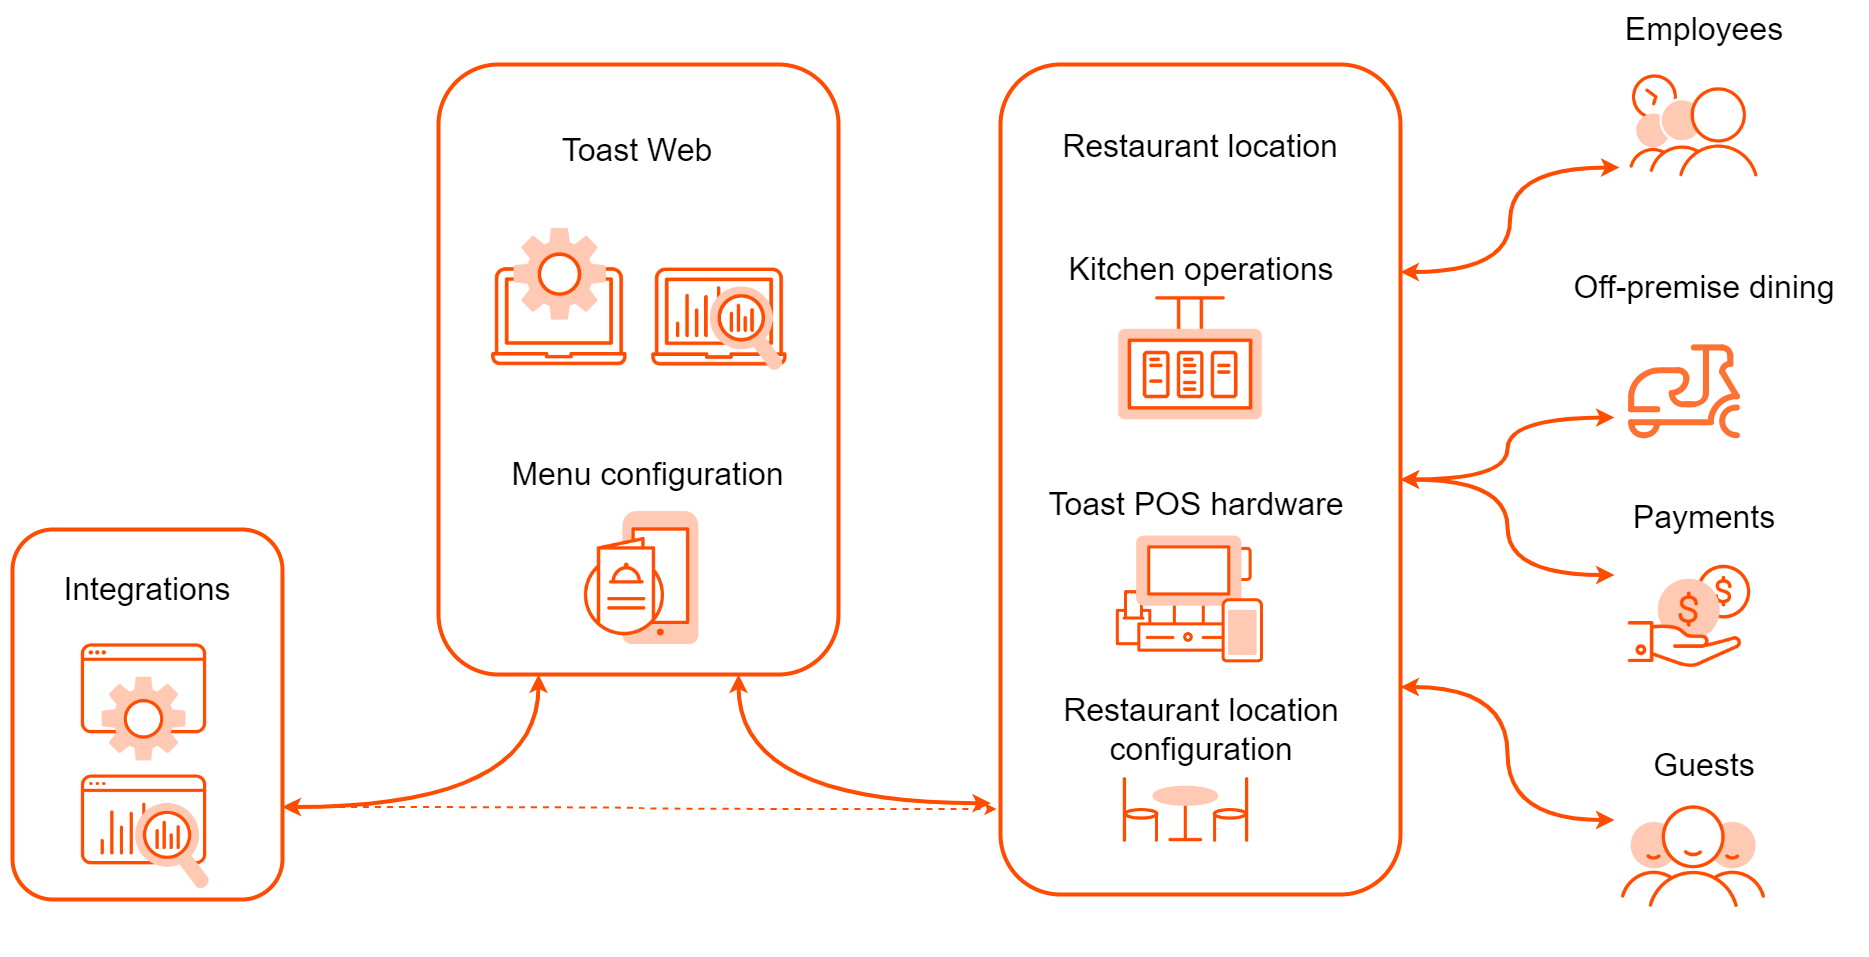 Diagram showing the components of the Toast platform. A restaurant location includes Toast POS devices for ordering and fulfillment. Configuration and reporting functions are in Toast Web.